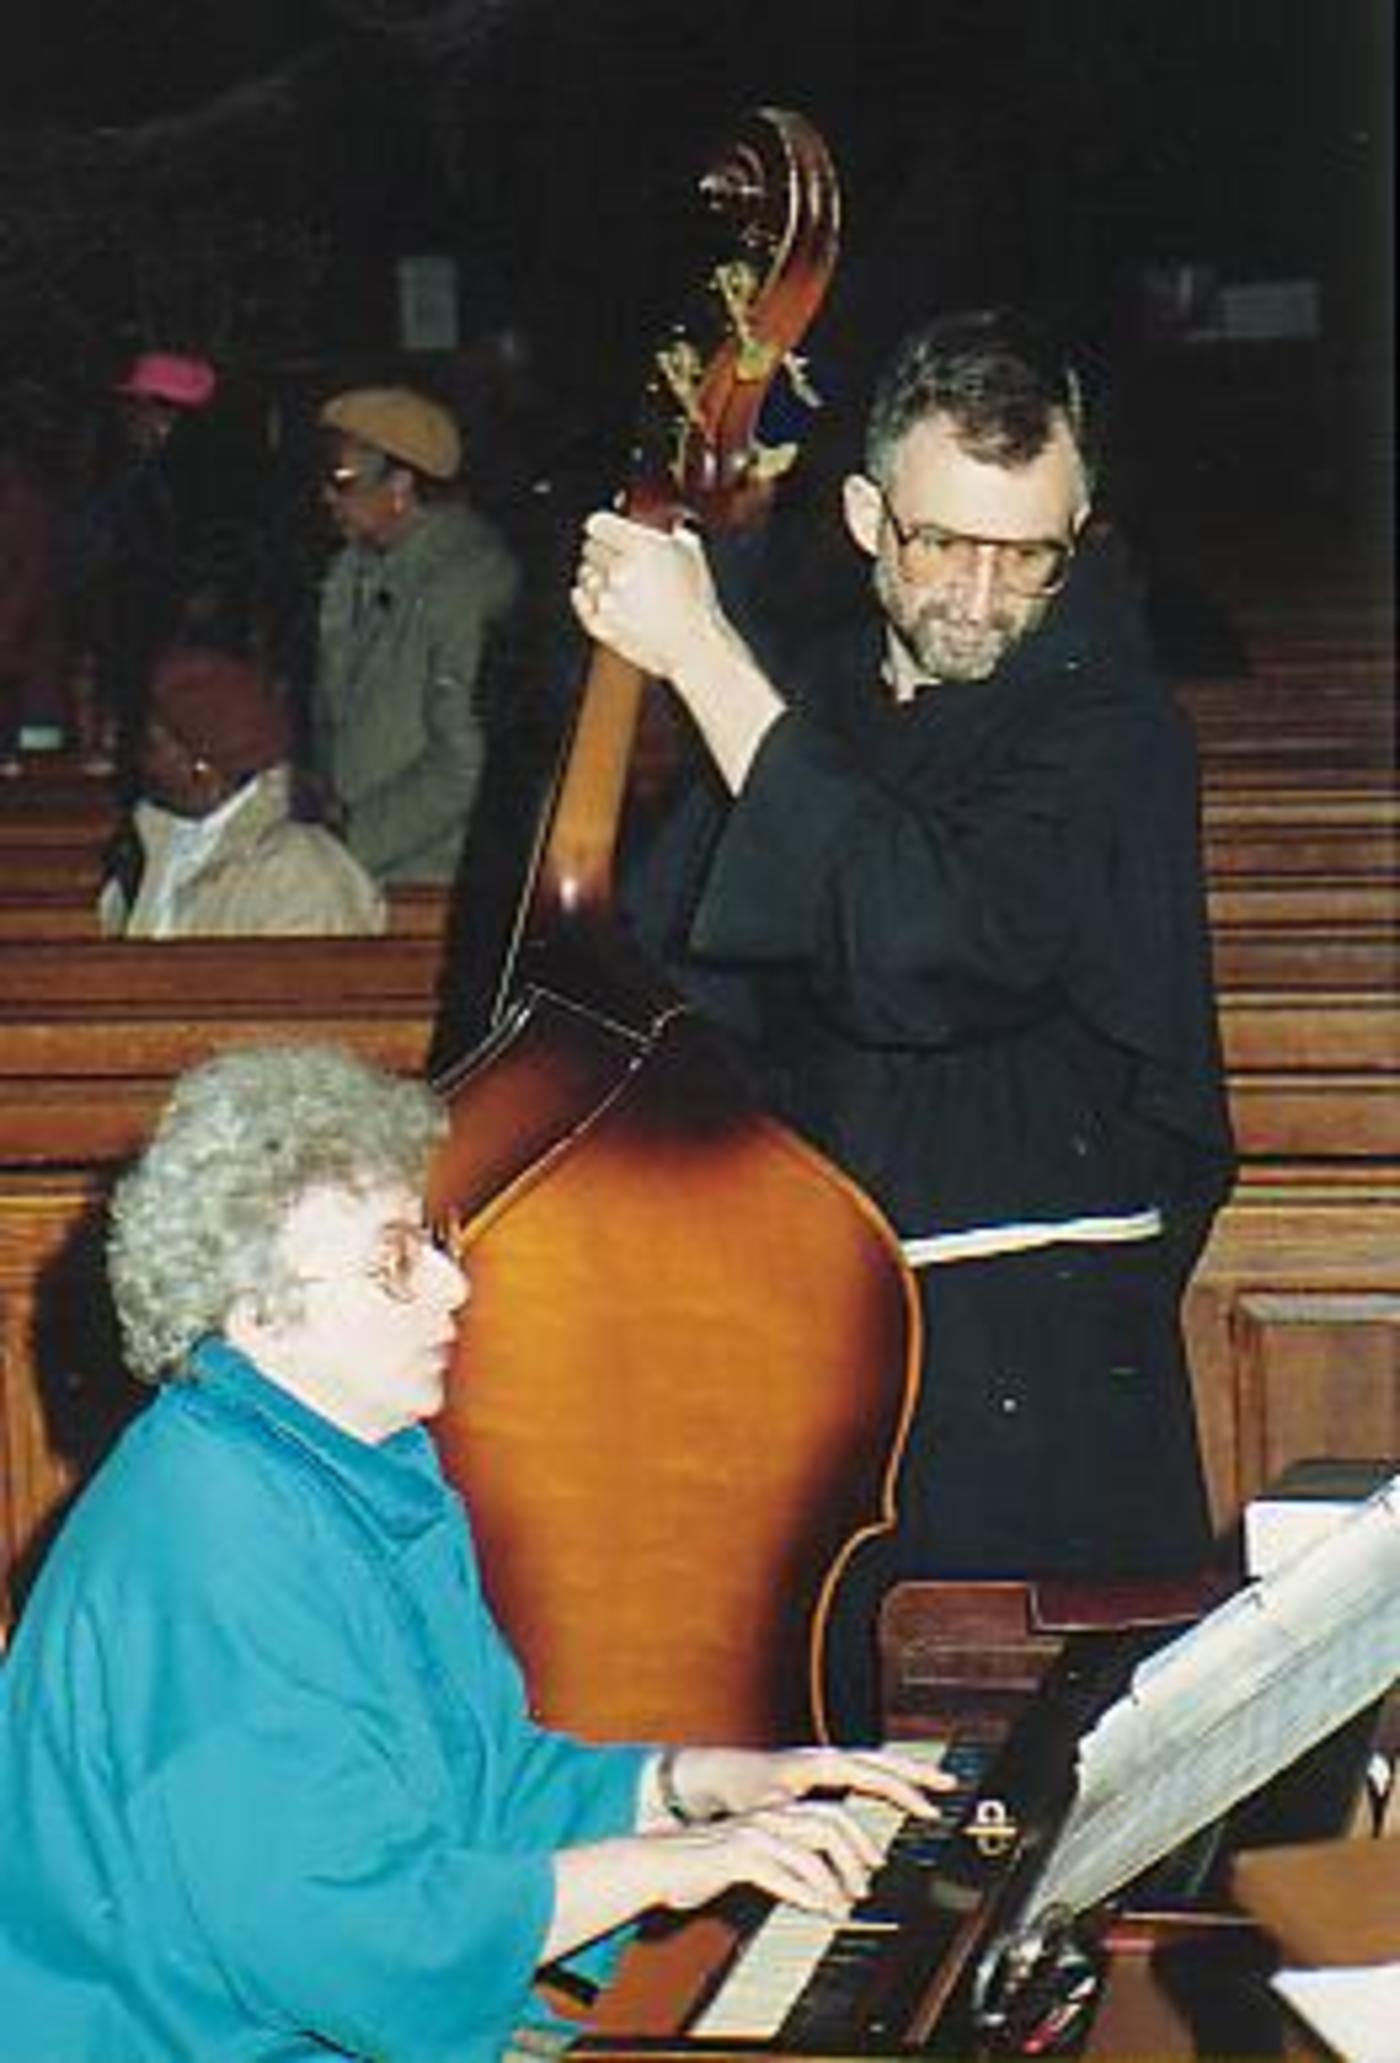 Fr. Ross Syracuse, OFM Conv. and former organist/pianist, Rosemary Carter 